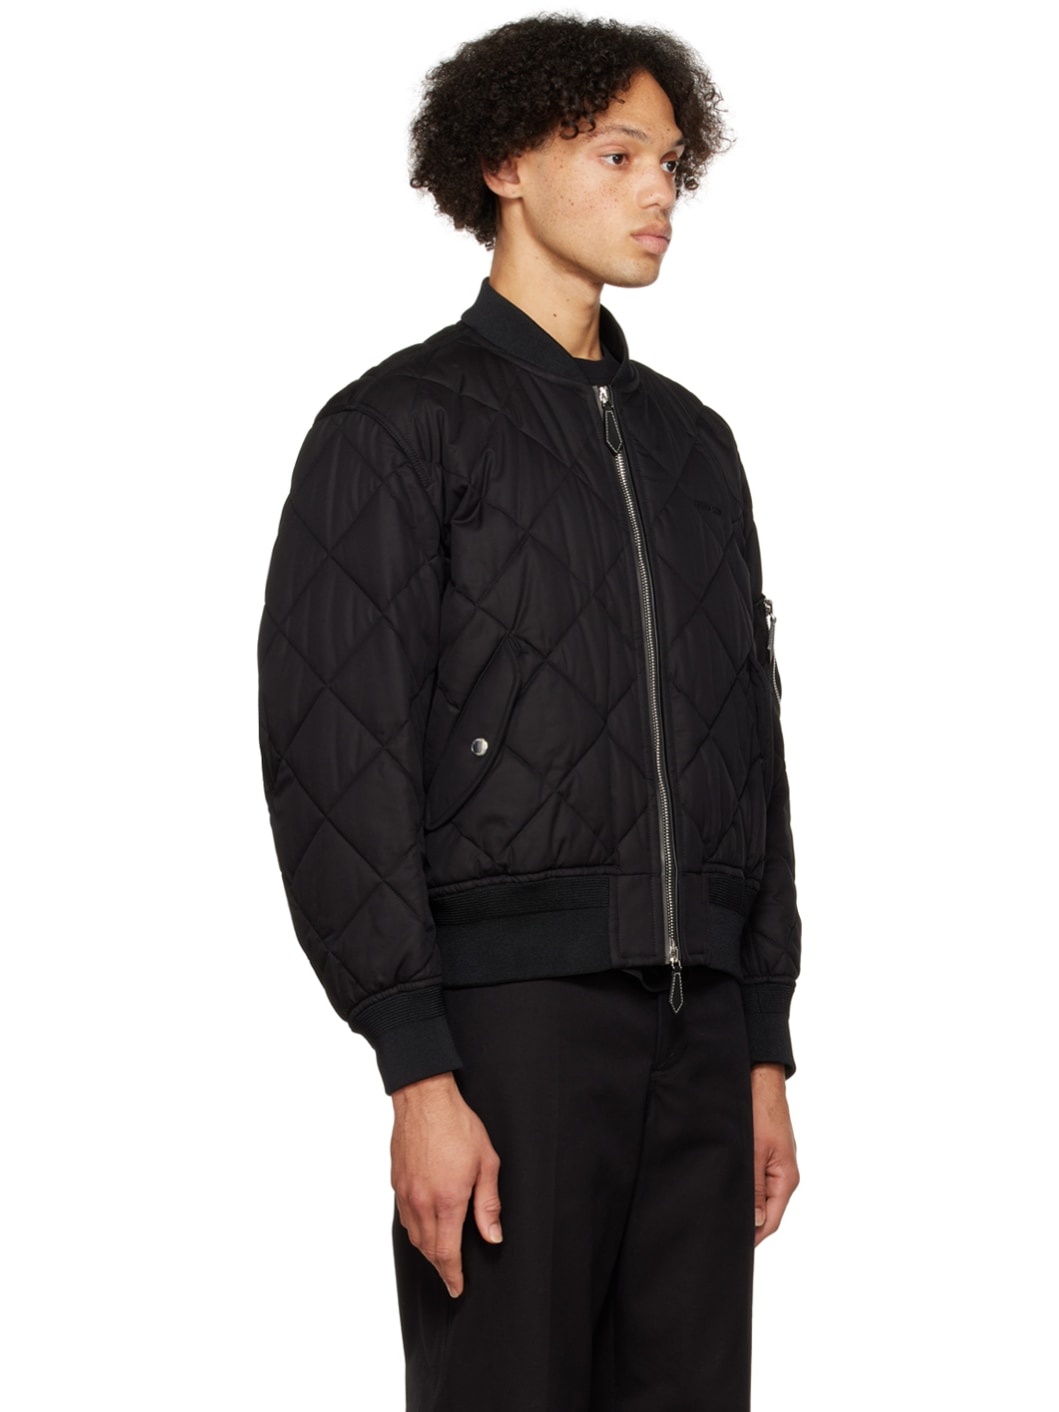 Black Diamond Quilted Bomber Jacket - 2